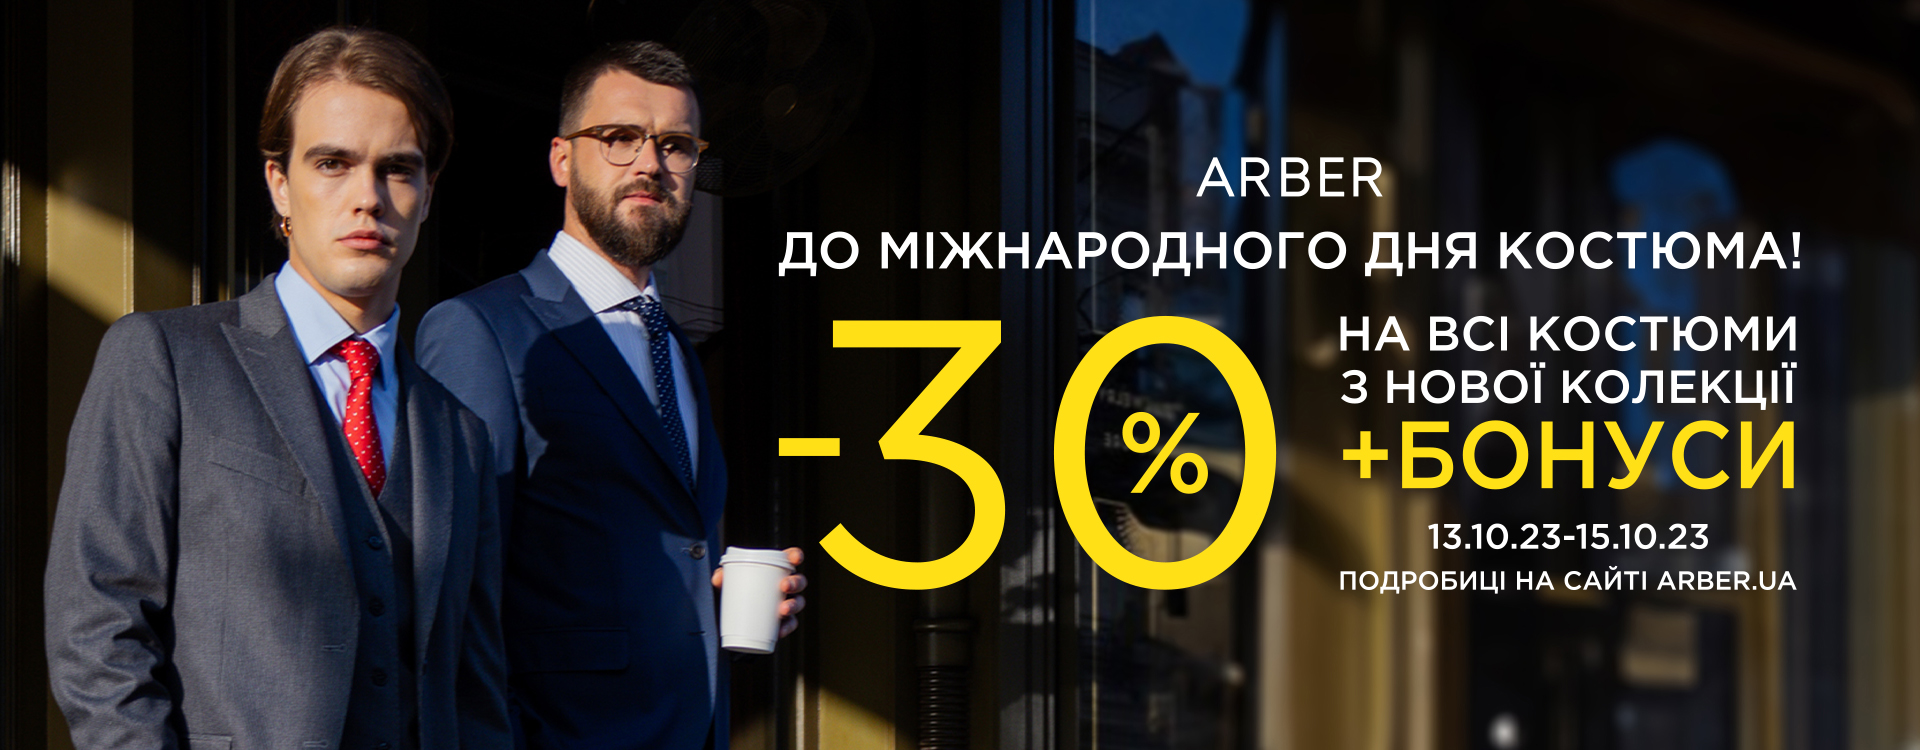 Favorable promotion in ARBER: only 3 days